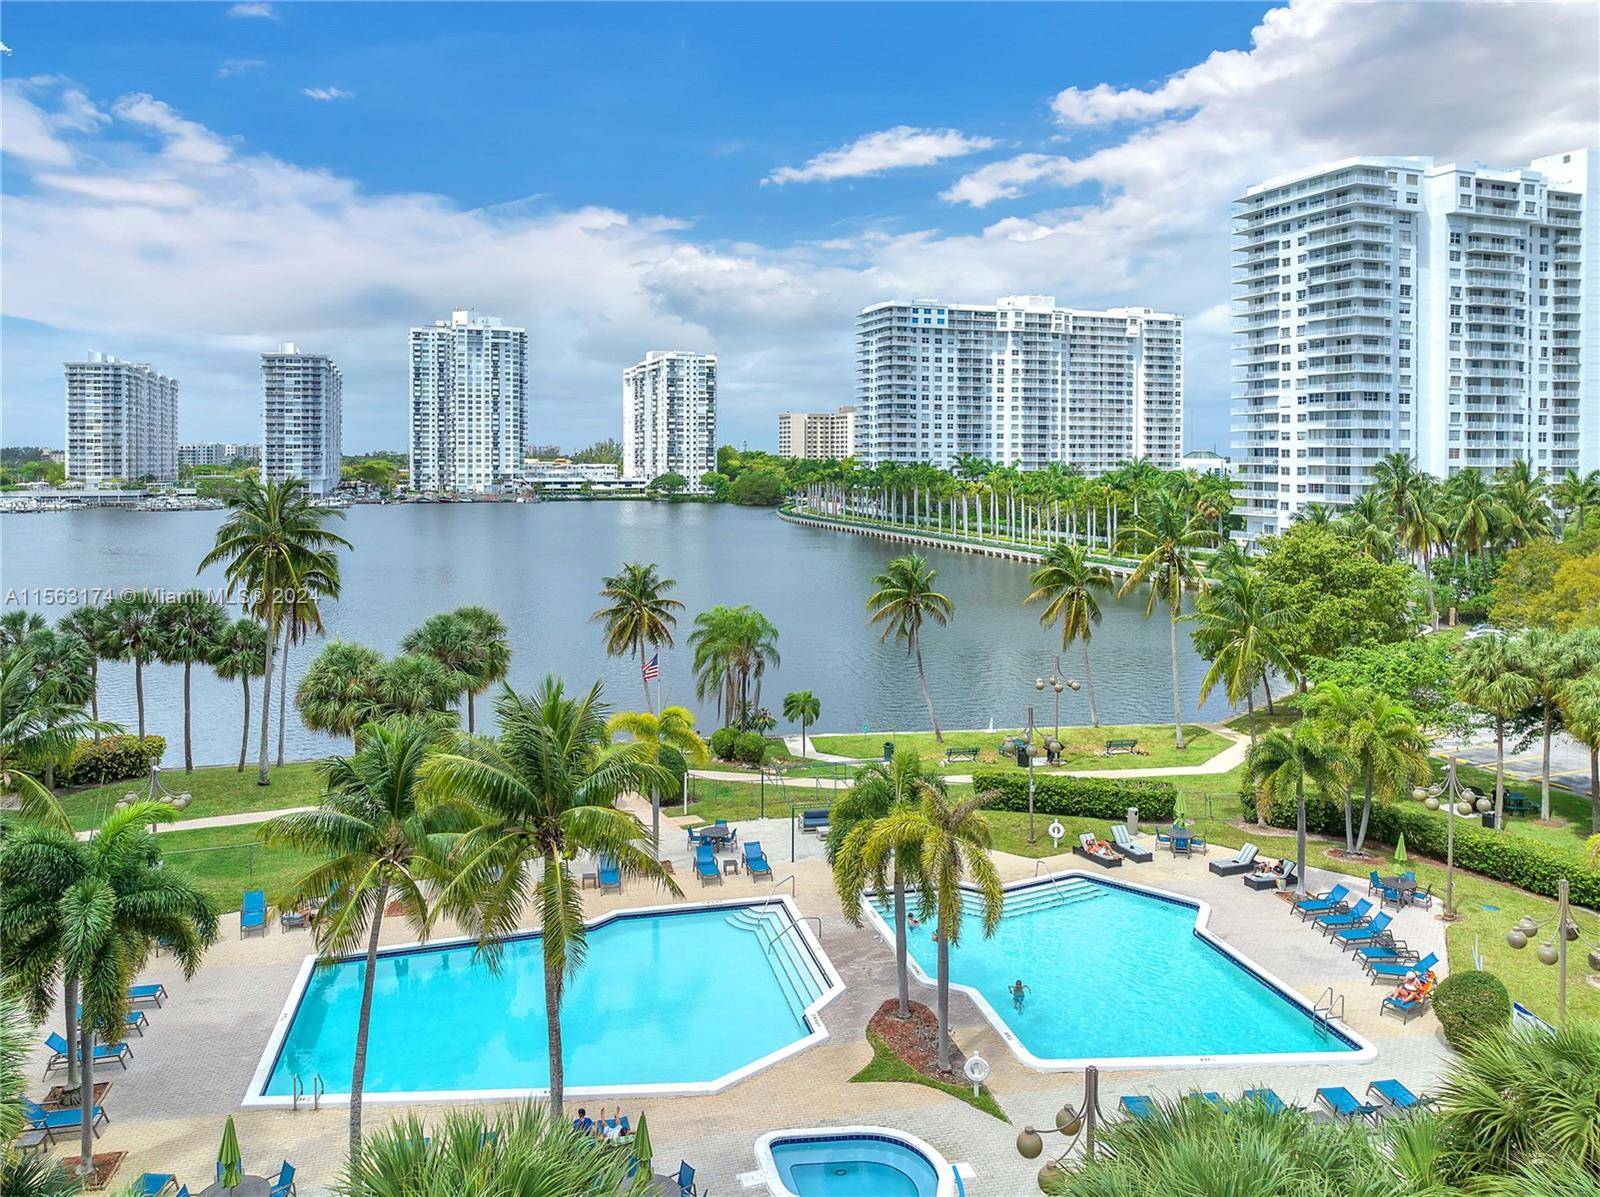 BEST LUXURY FINISHING IN AVENTURA Biscayne Cove Condo offers an exquisite selection of luxury apartments in aventura, boasting brand new interior finishing starting from 476, 000.